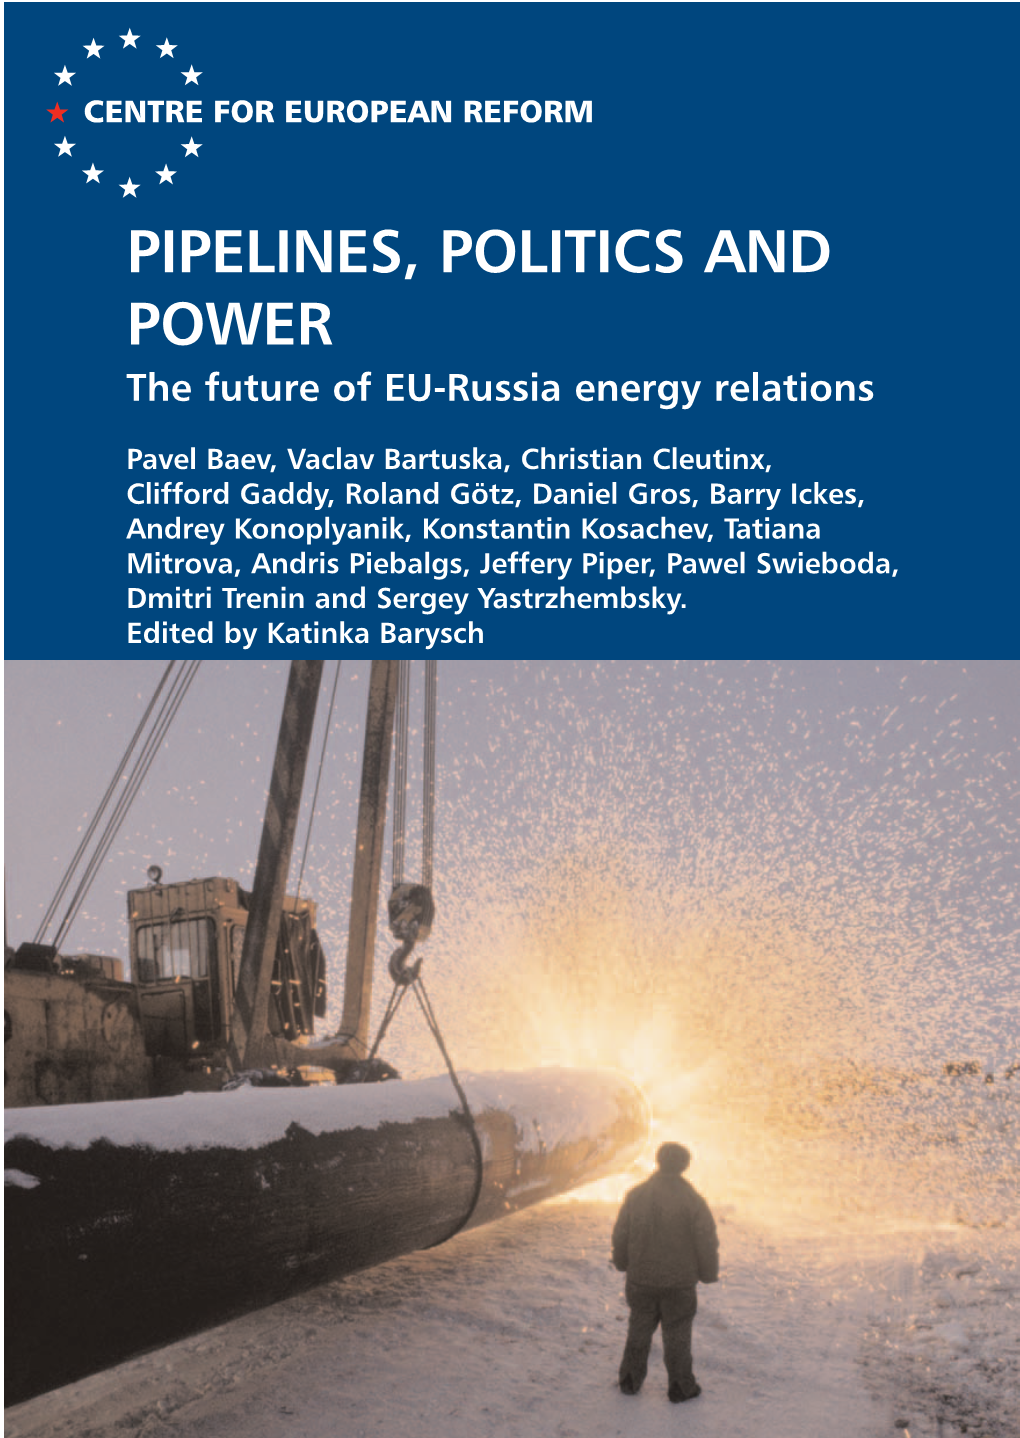 Pipelines, Politics and Power: the Future of EU-Russia Energy